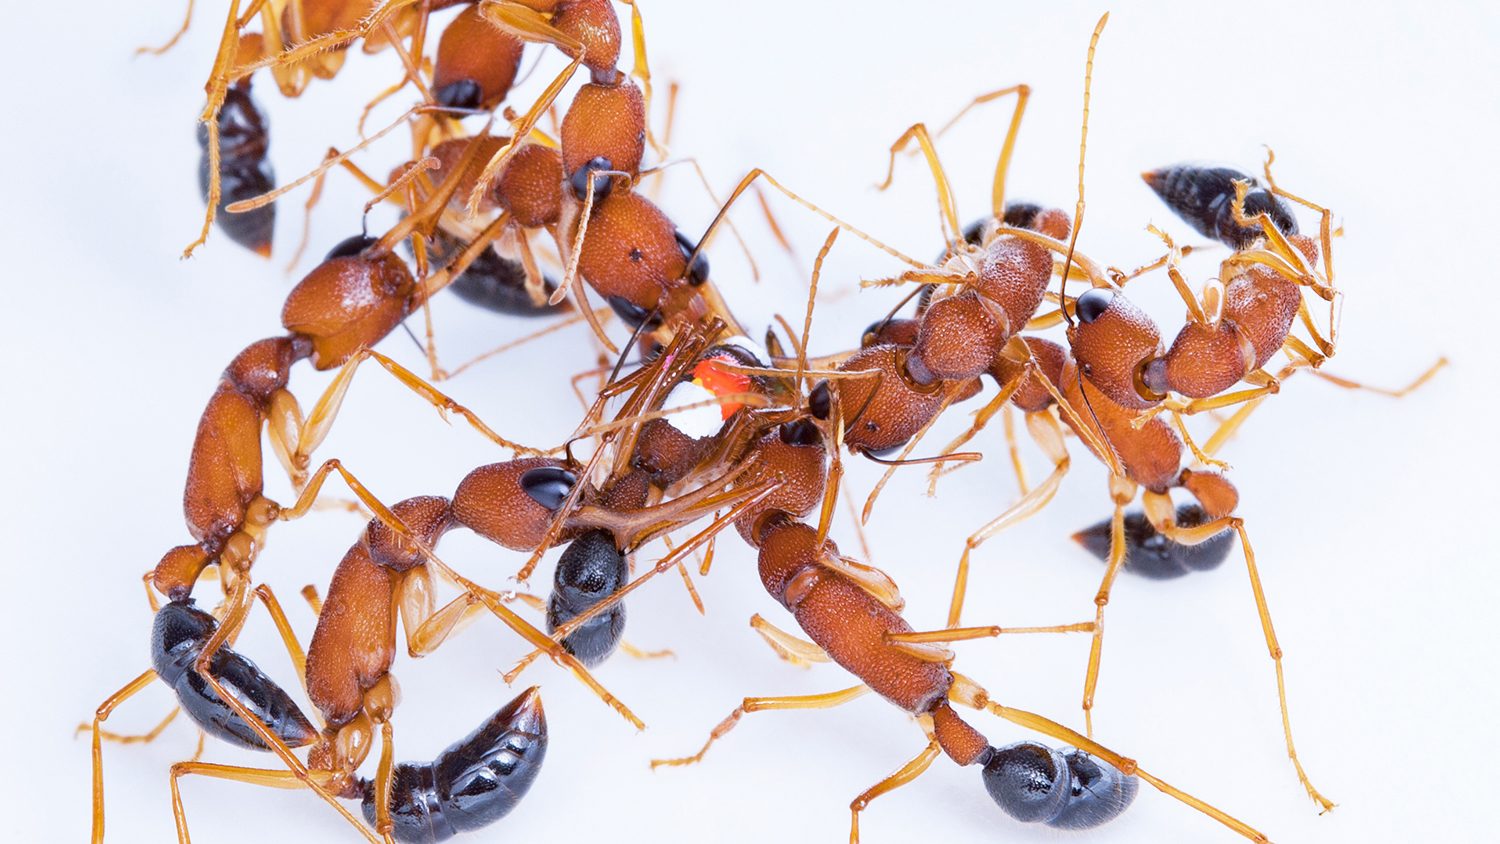 Ants on white background